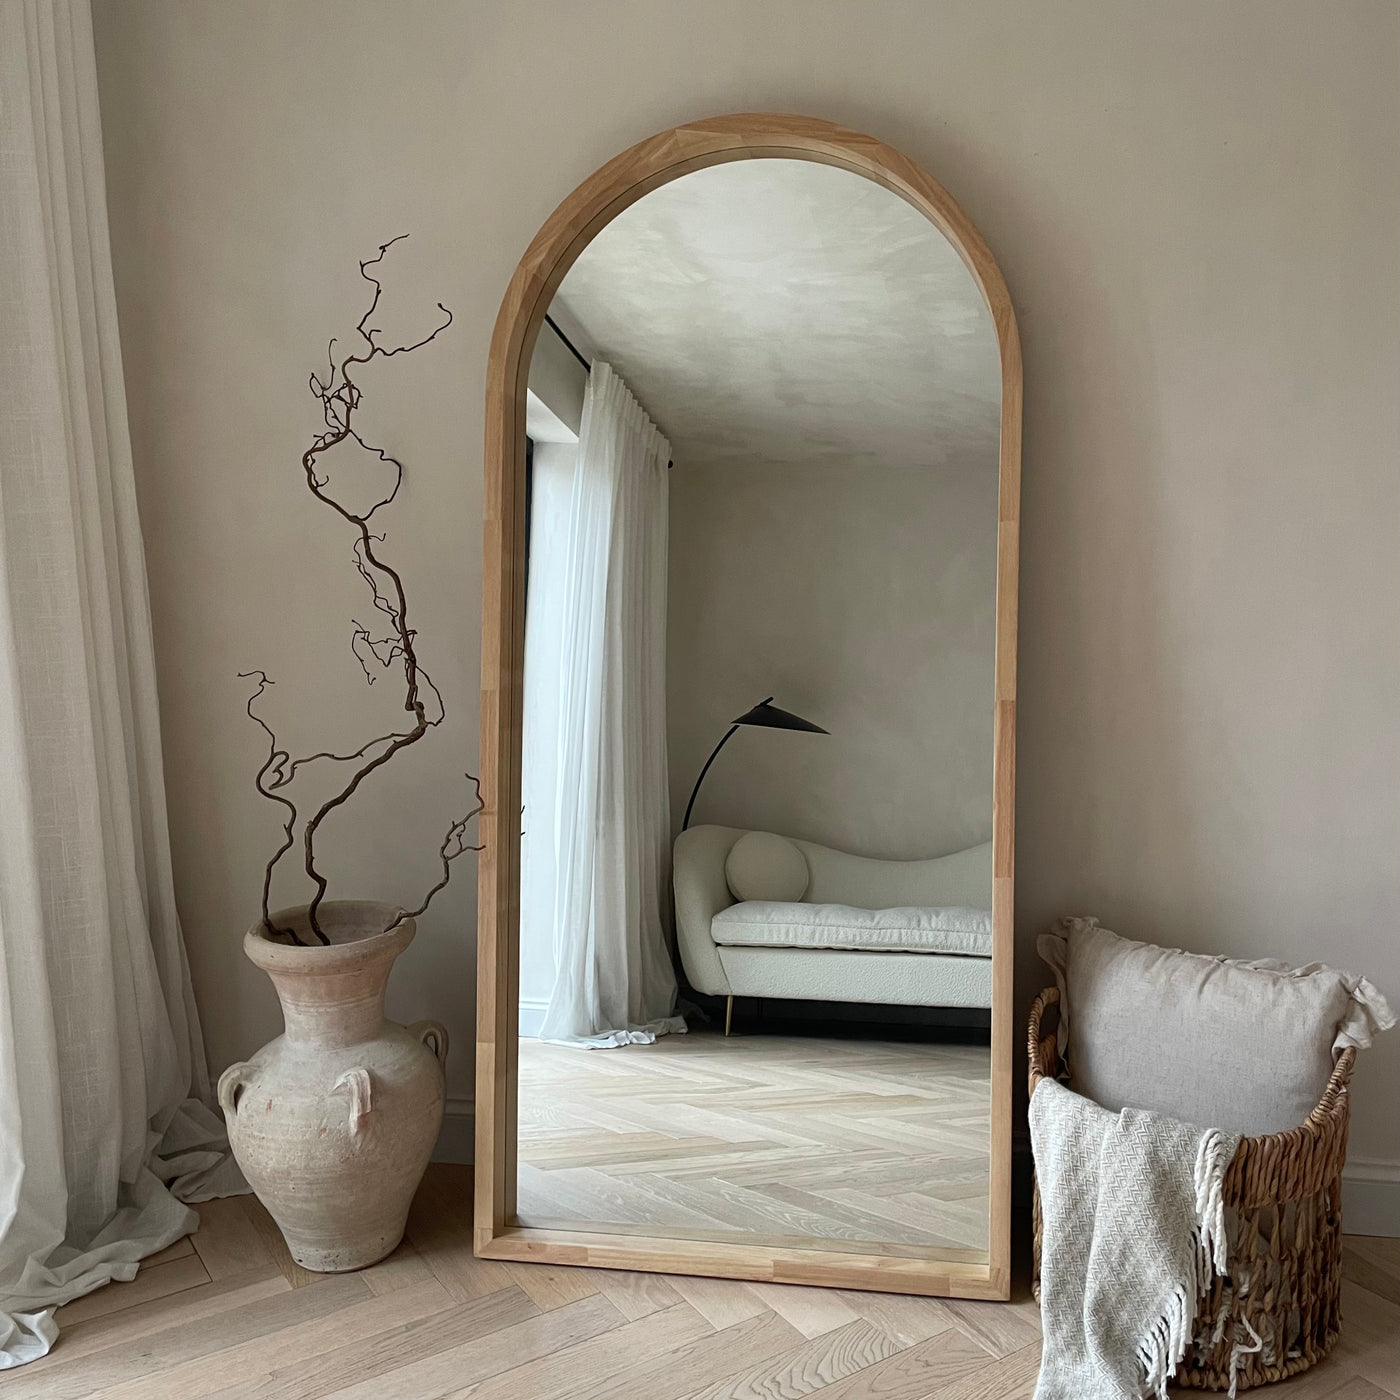 Natural Organic Full Length Wooden Arched Mirror leaning against wall